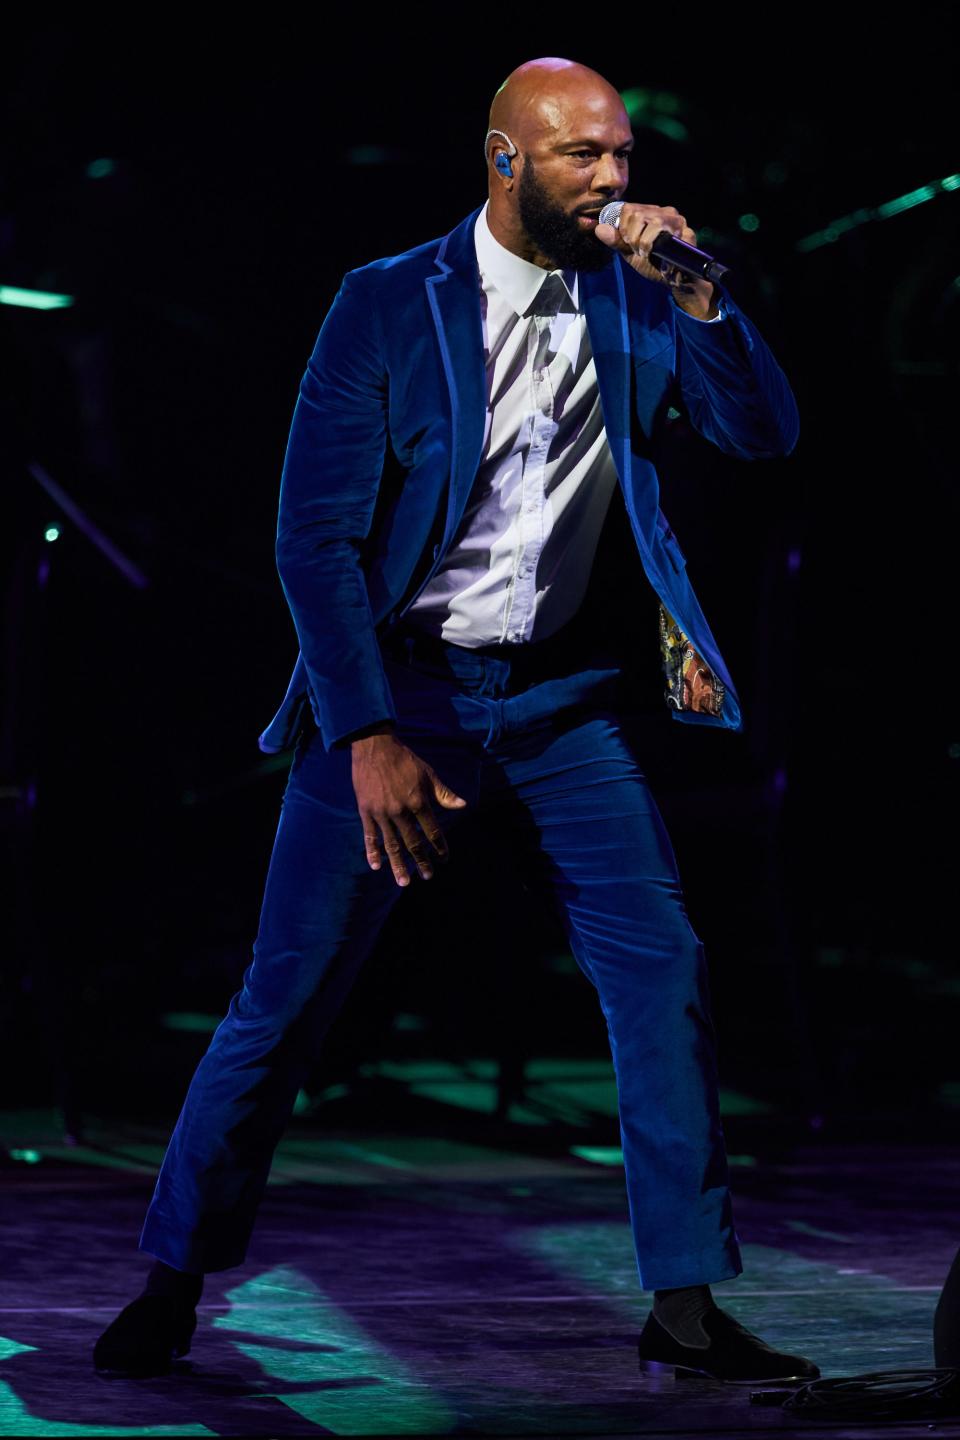 Common was an unannounced guest performer at the Kennedy Center 50th Anniversary Celebration concert, which took place Sept. 14, 2021 and airs on PBS Oct. 1.